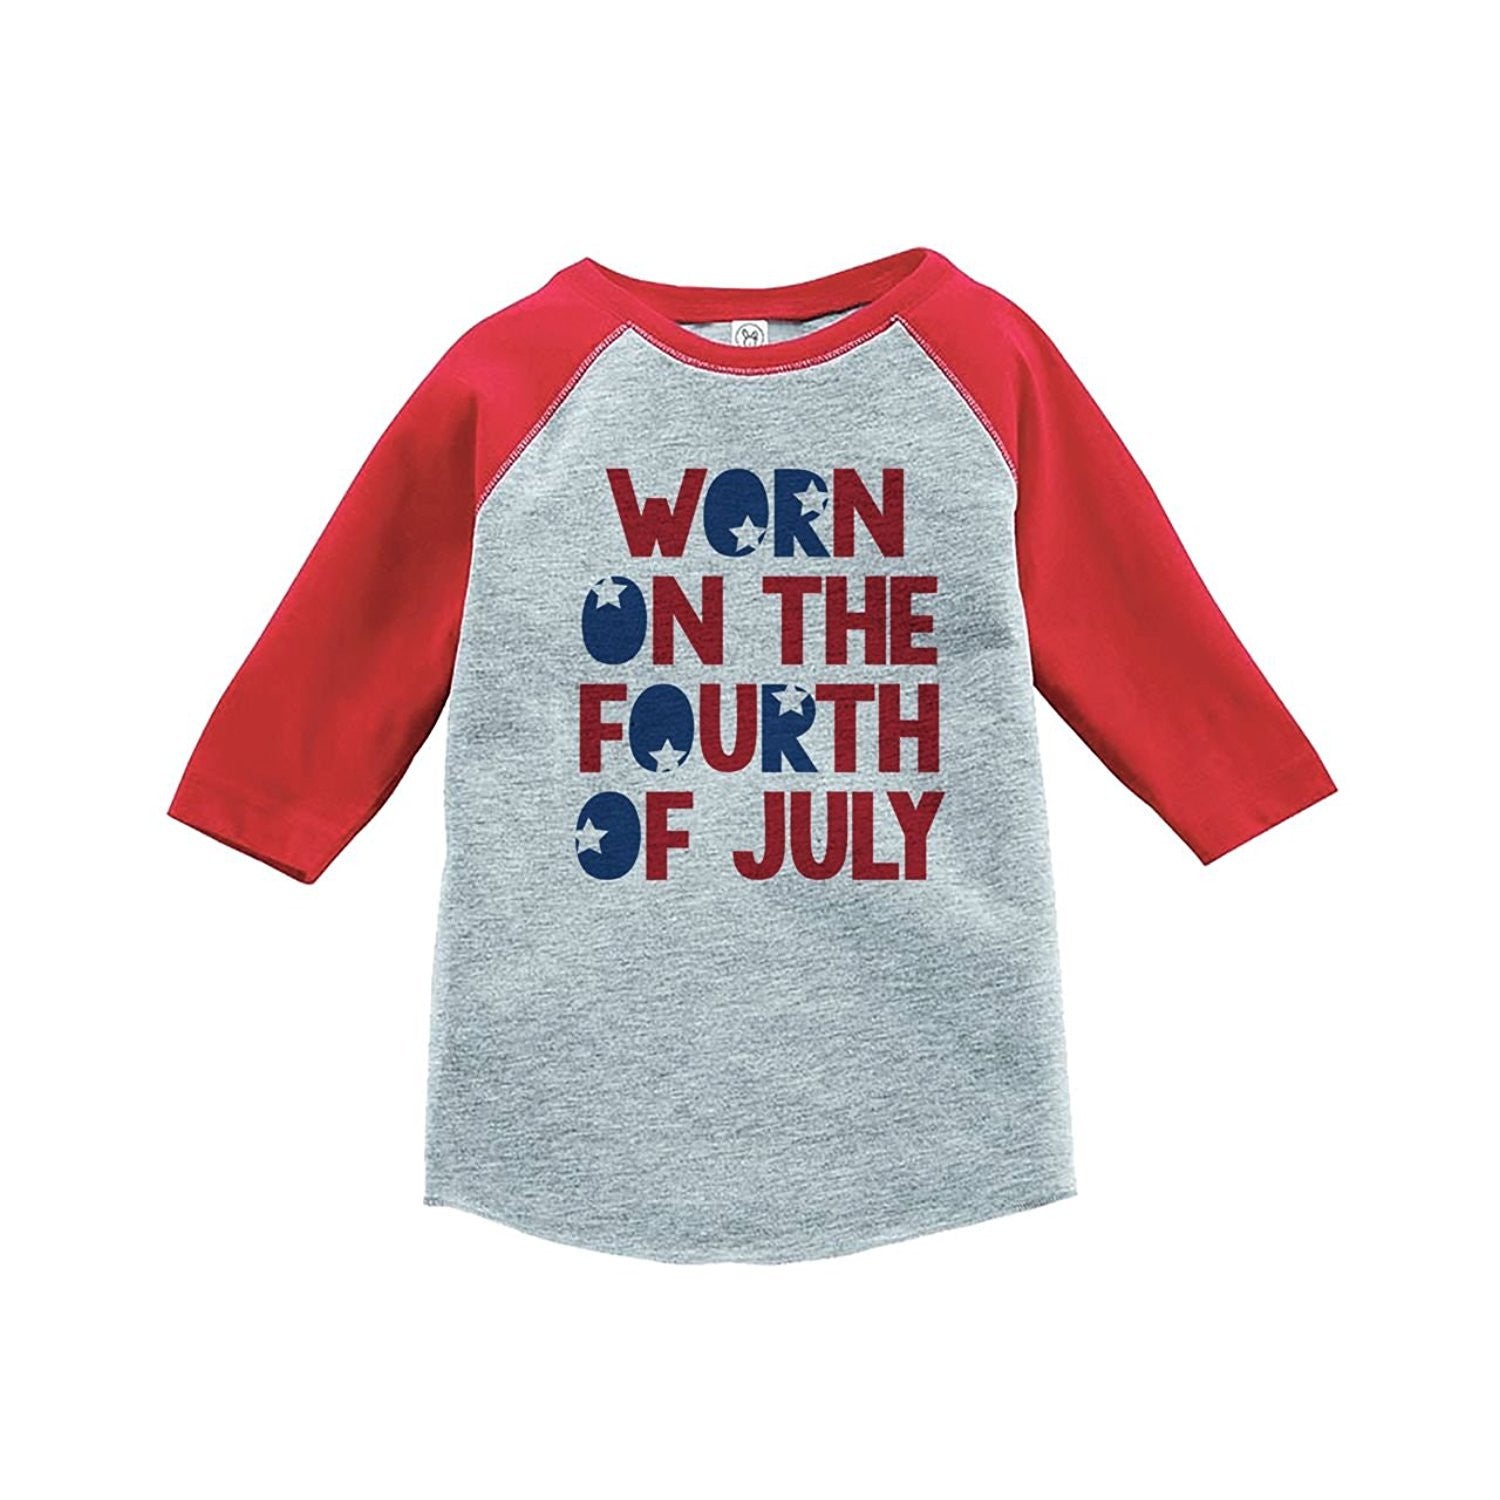 7 ate 9 Apparel Kids Worn On The Fourth 4th of July Red Baseball